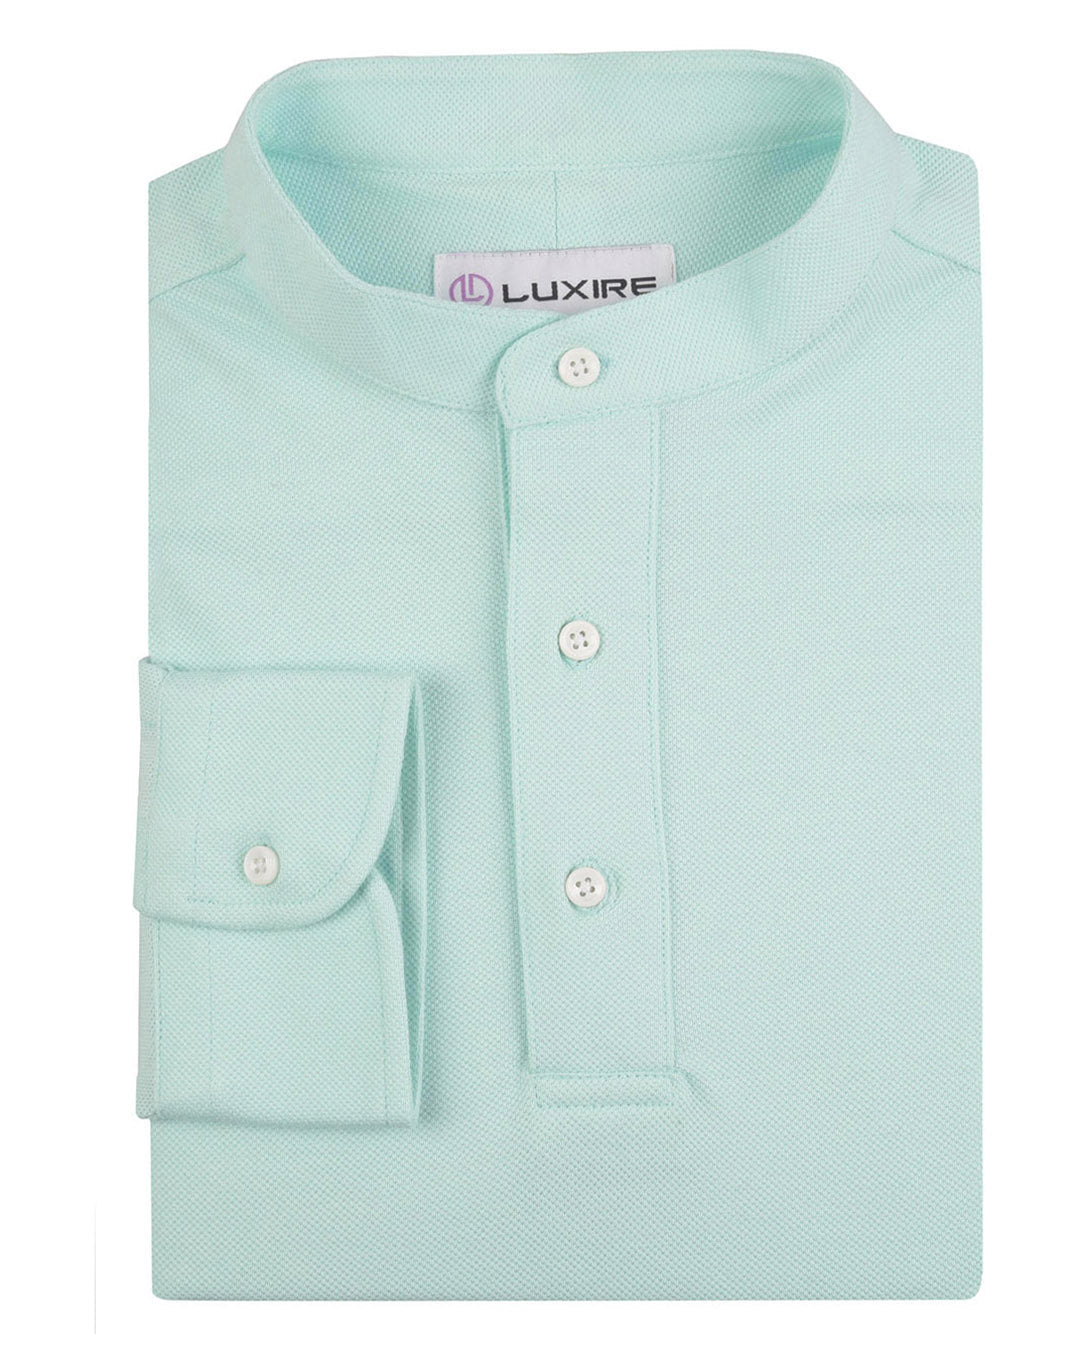 Front of the custom oxford polo shirt for men by Luxire in mid blue